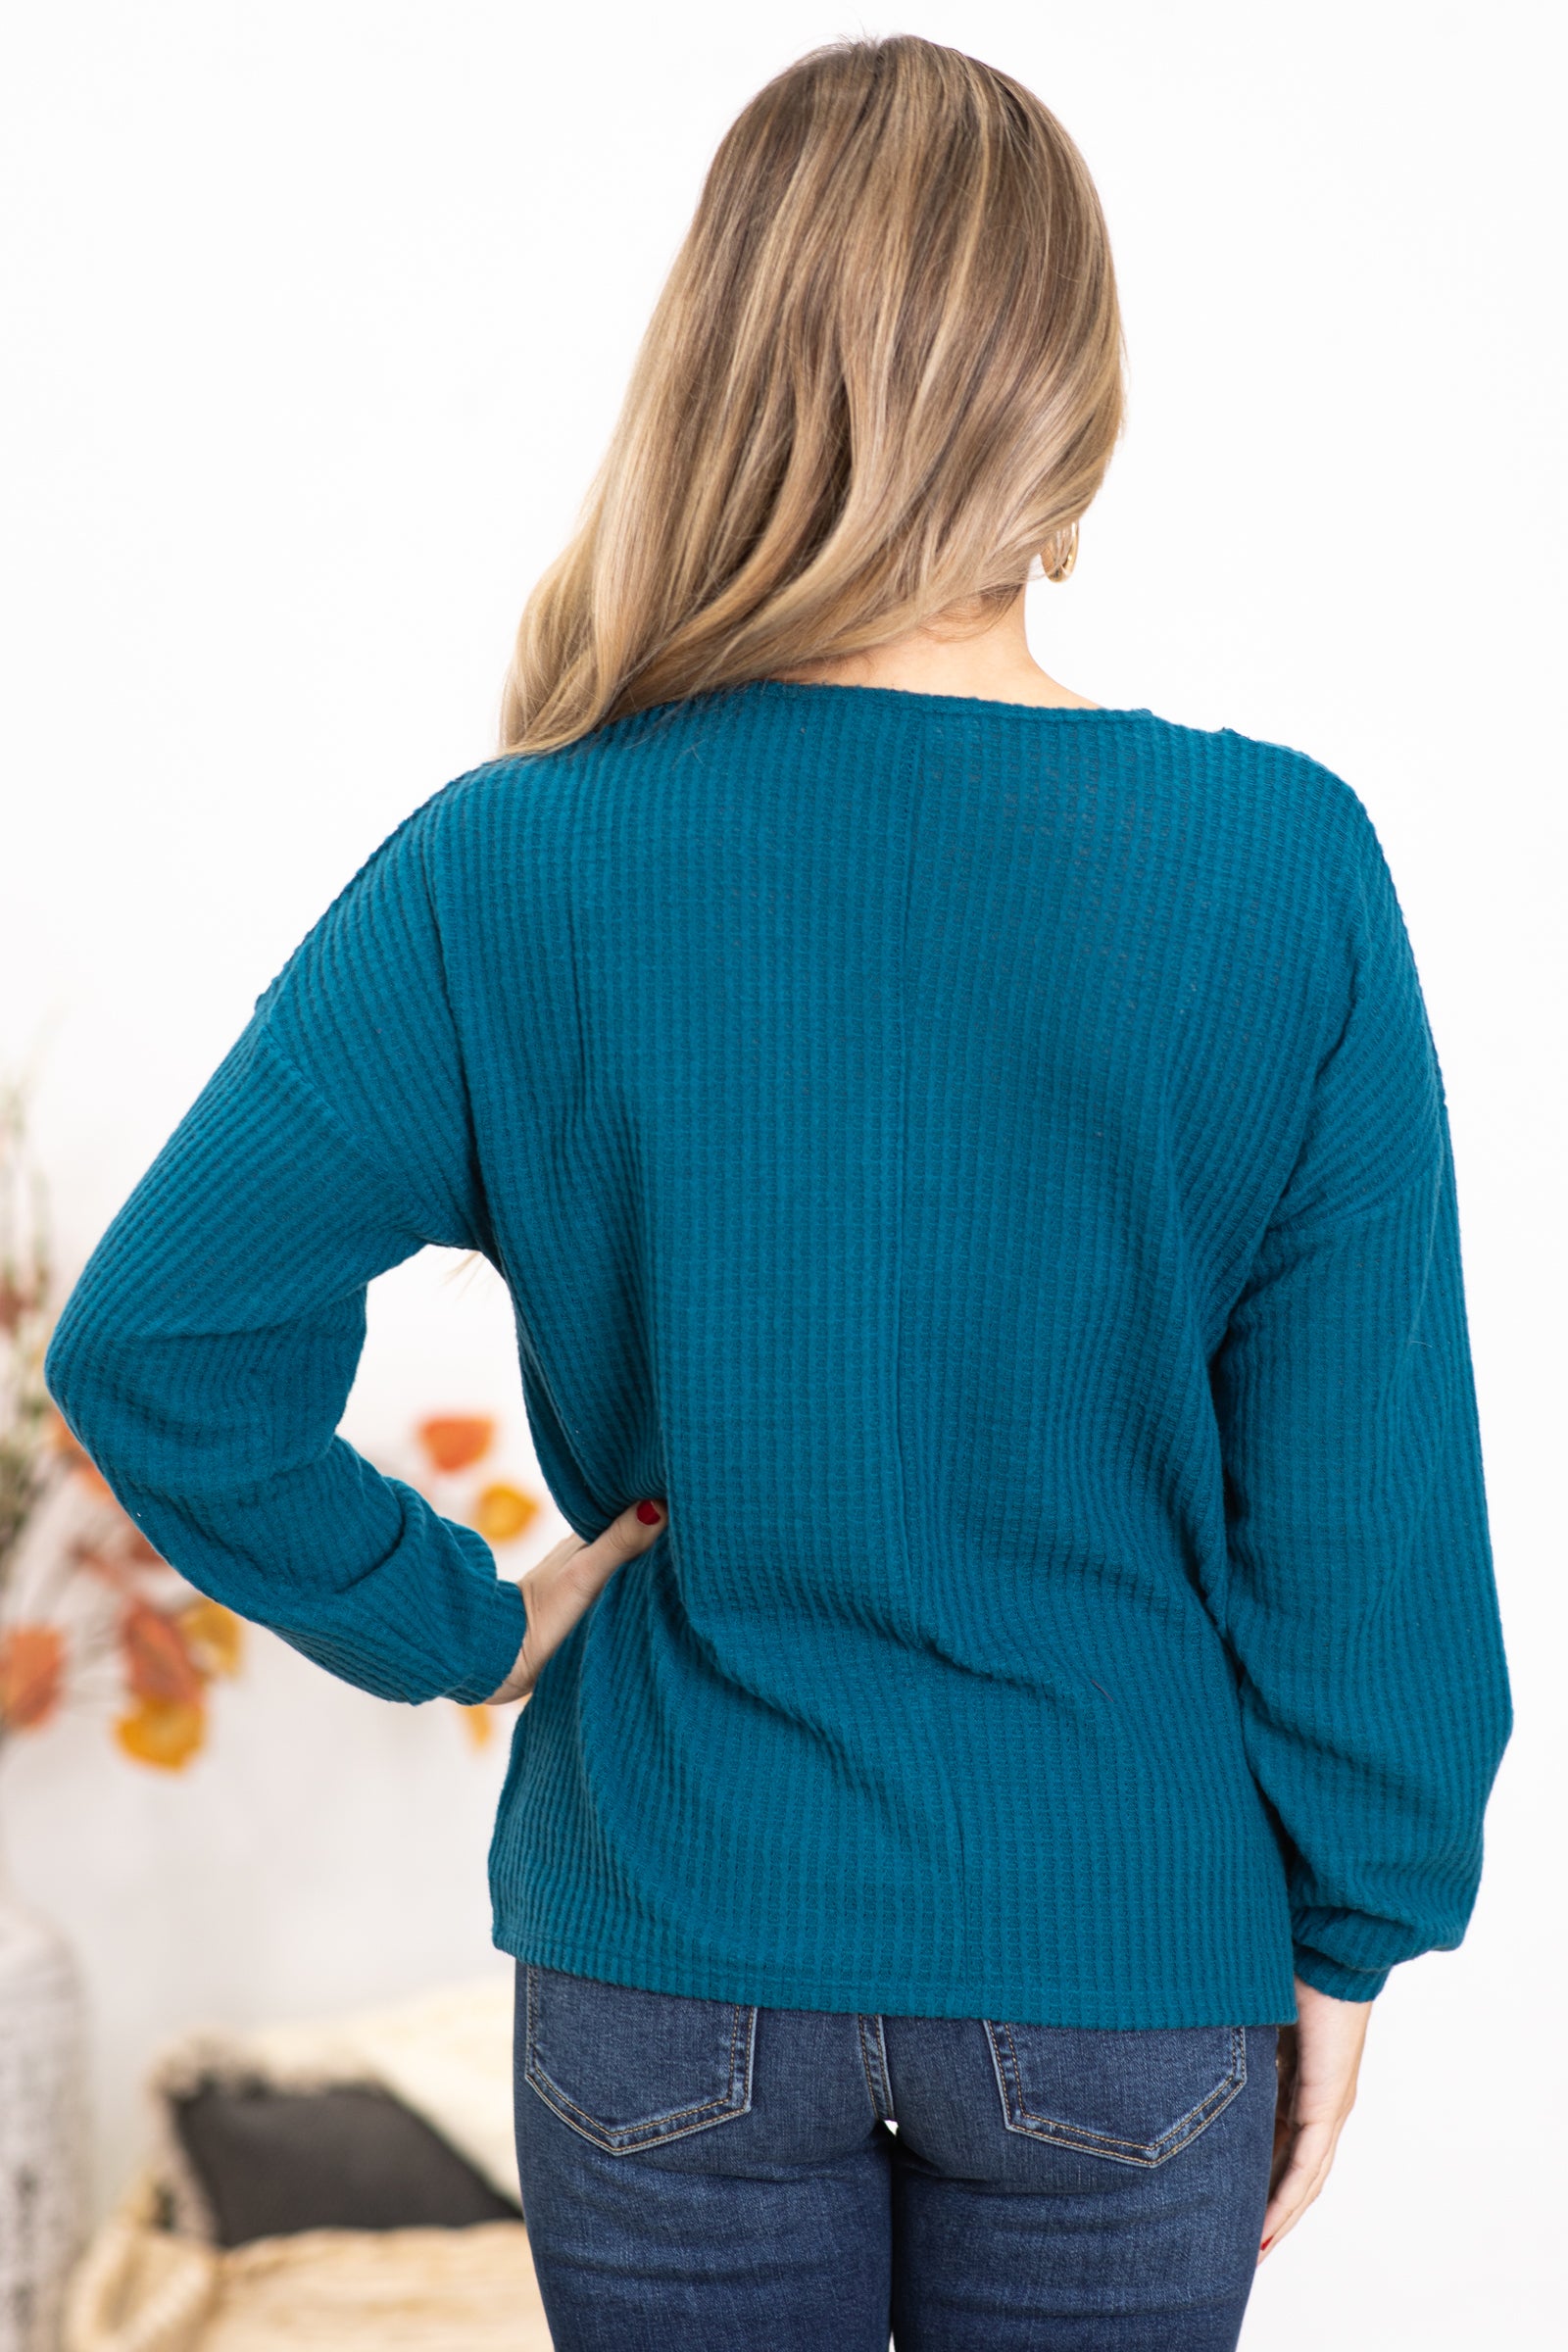 Teal Brushed Waffle Knit Sweater